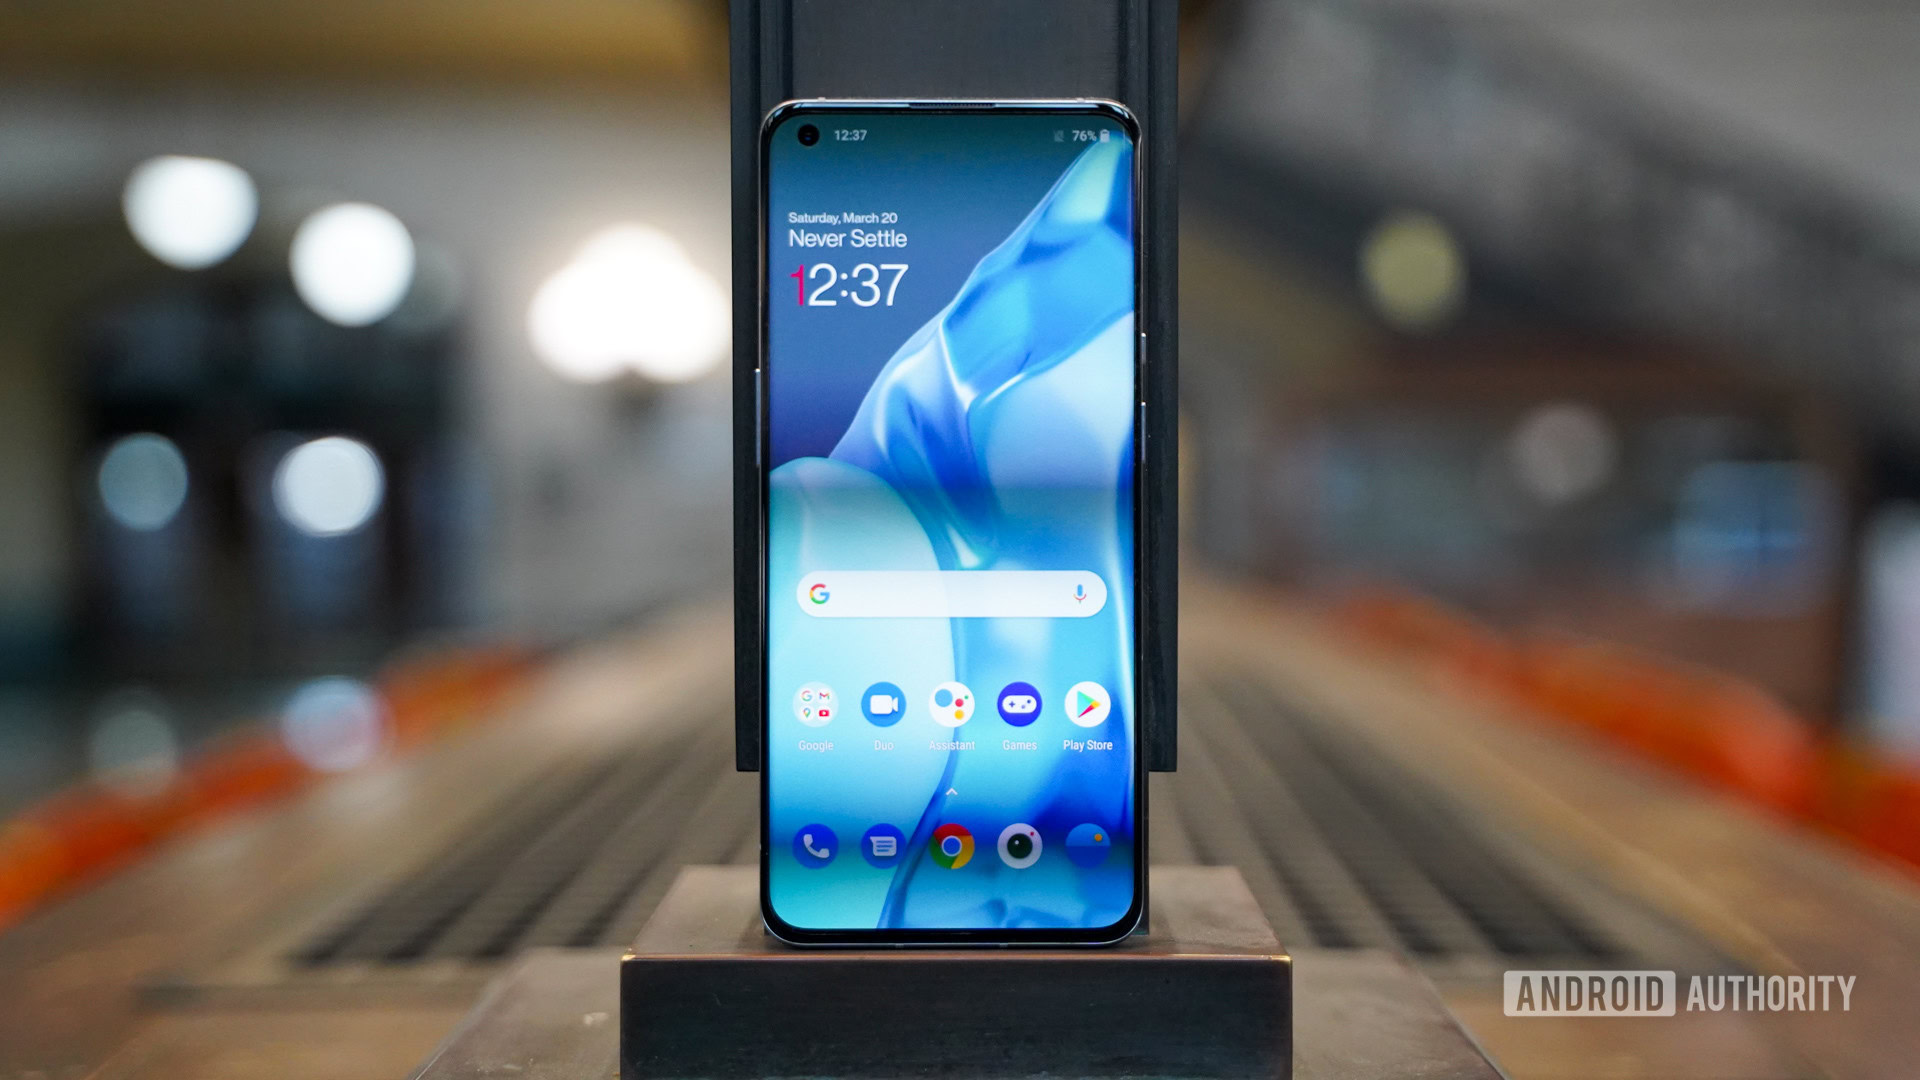 The OnePlus 9 Pro standing tall showing the screen and apps.